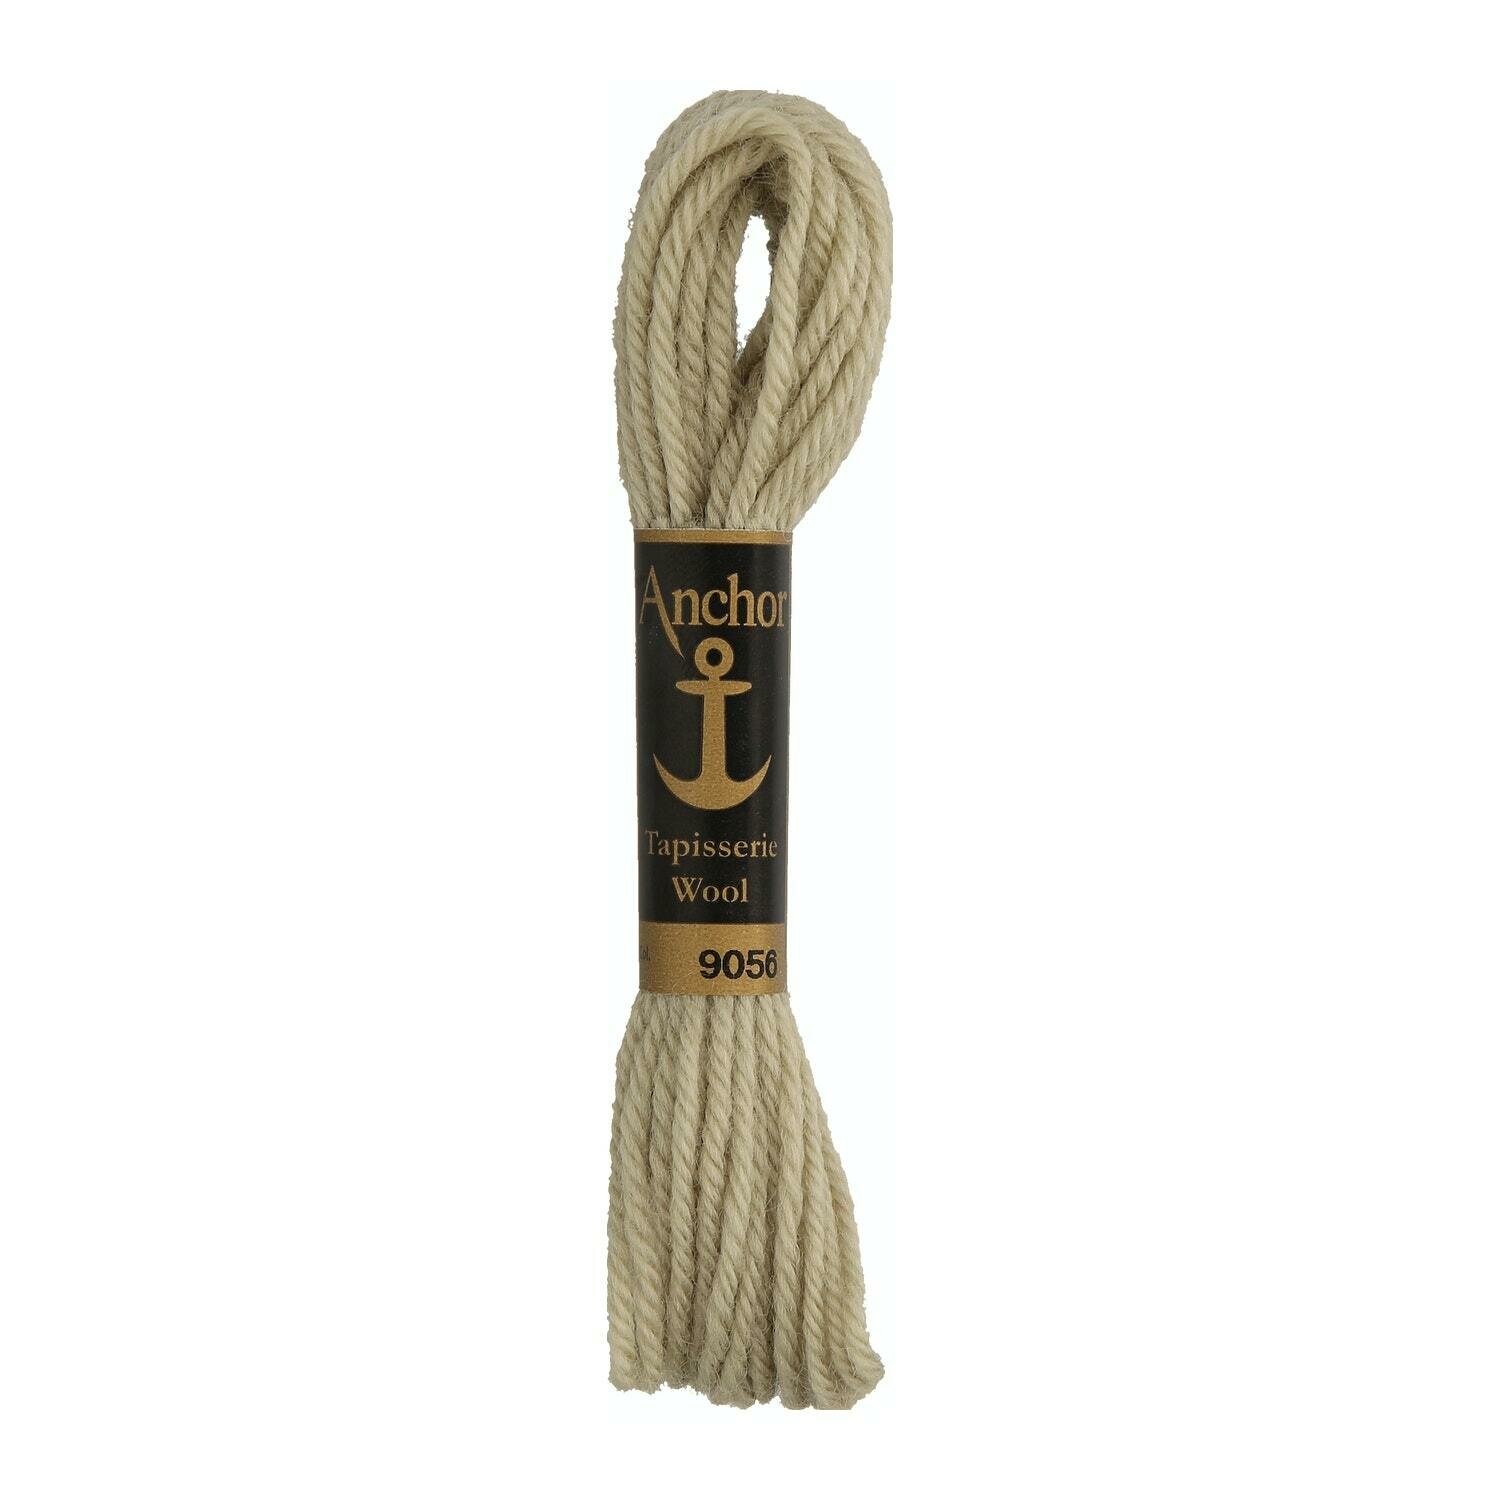 Anchor Tapisserie Wool # 09056